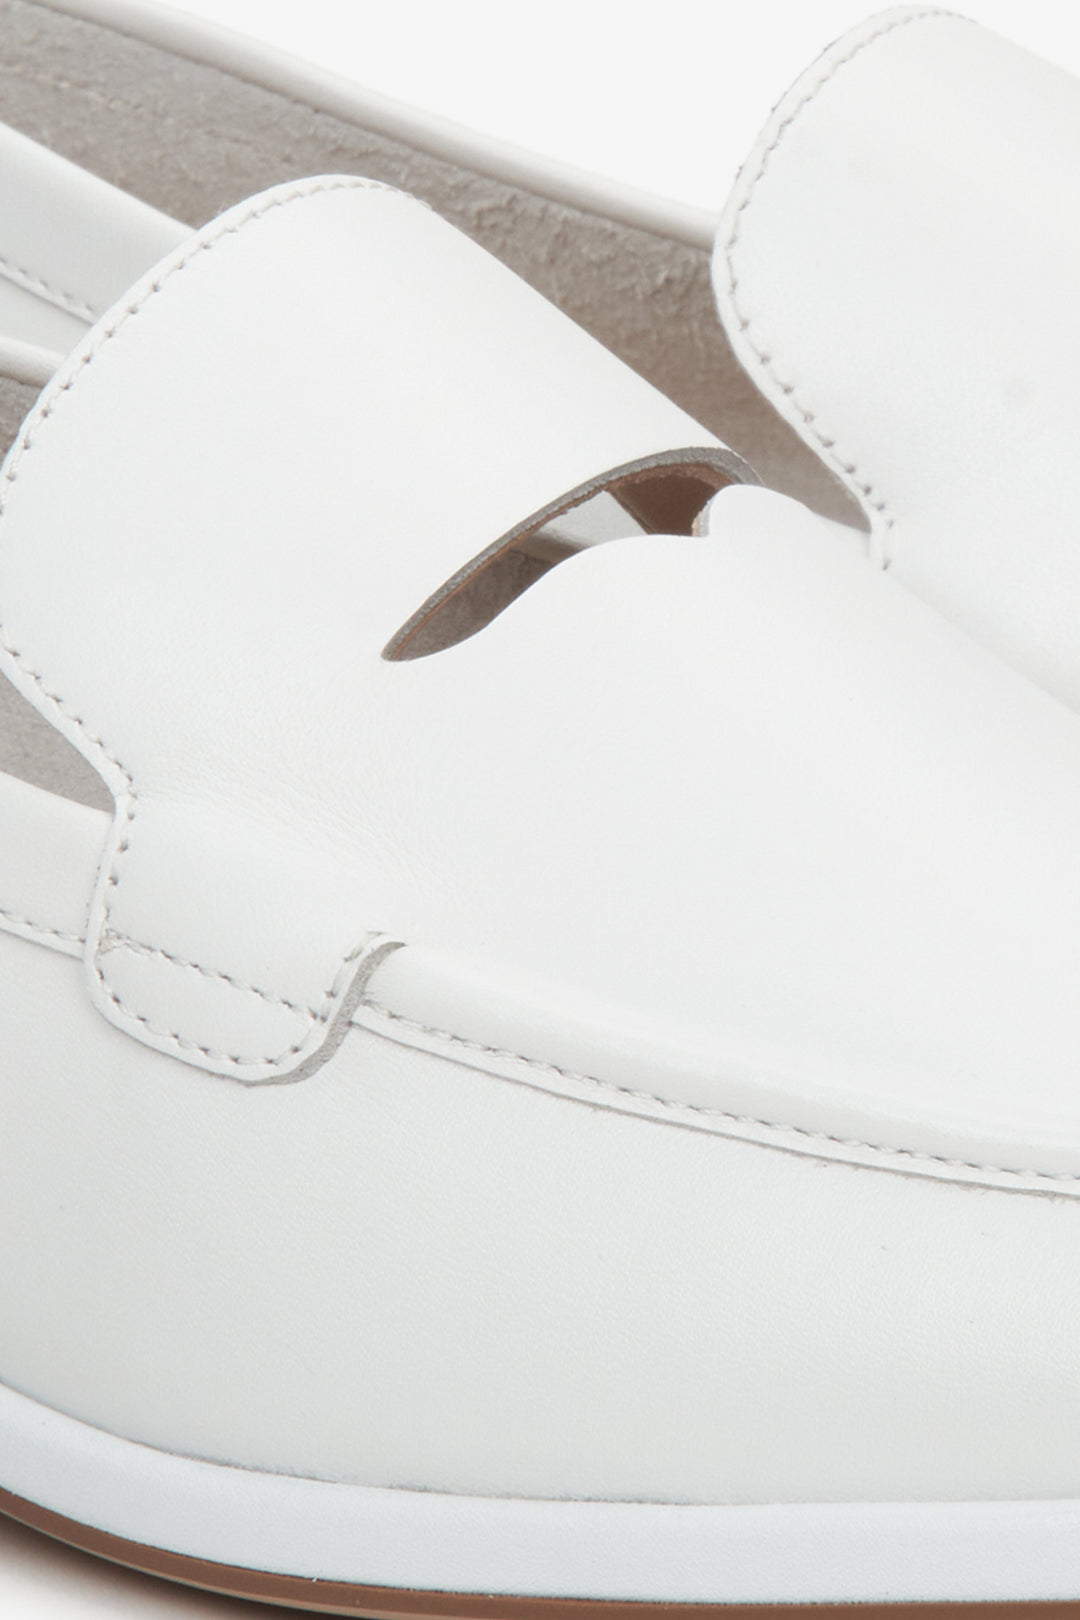 Leather, women's white moccasins by Estro - close-up on the details.